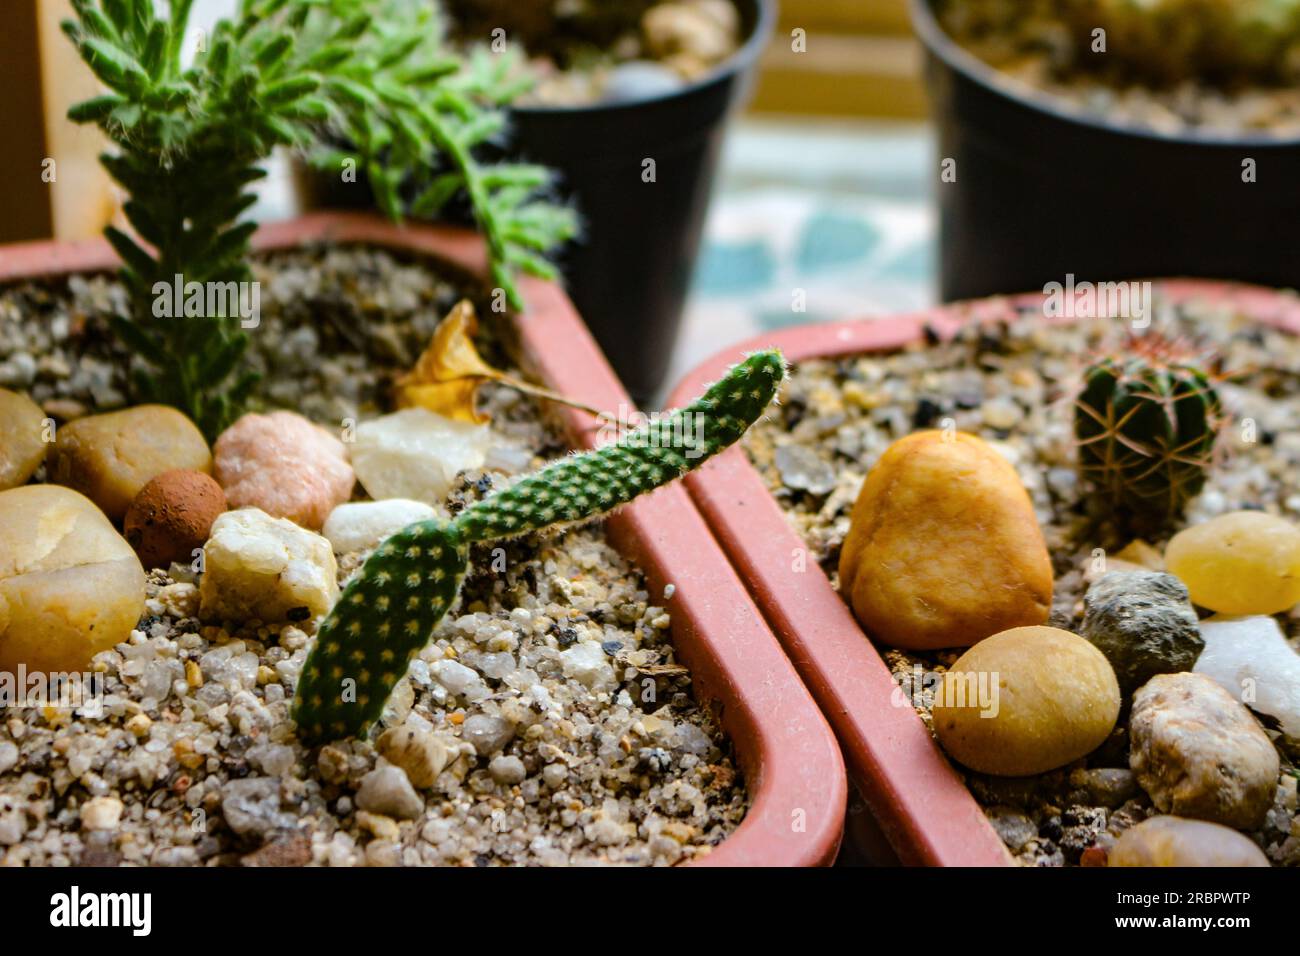 Cacti in small pots at home Stock Photo